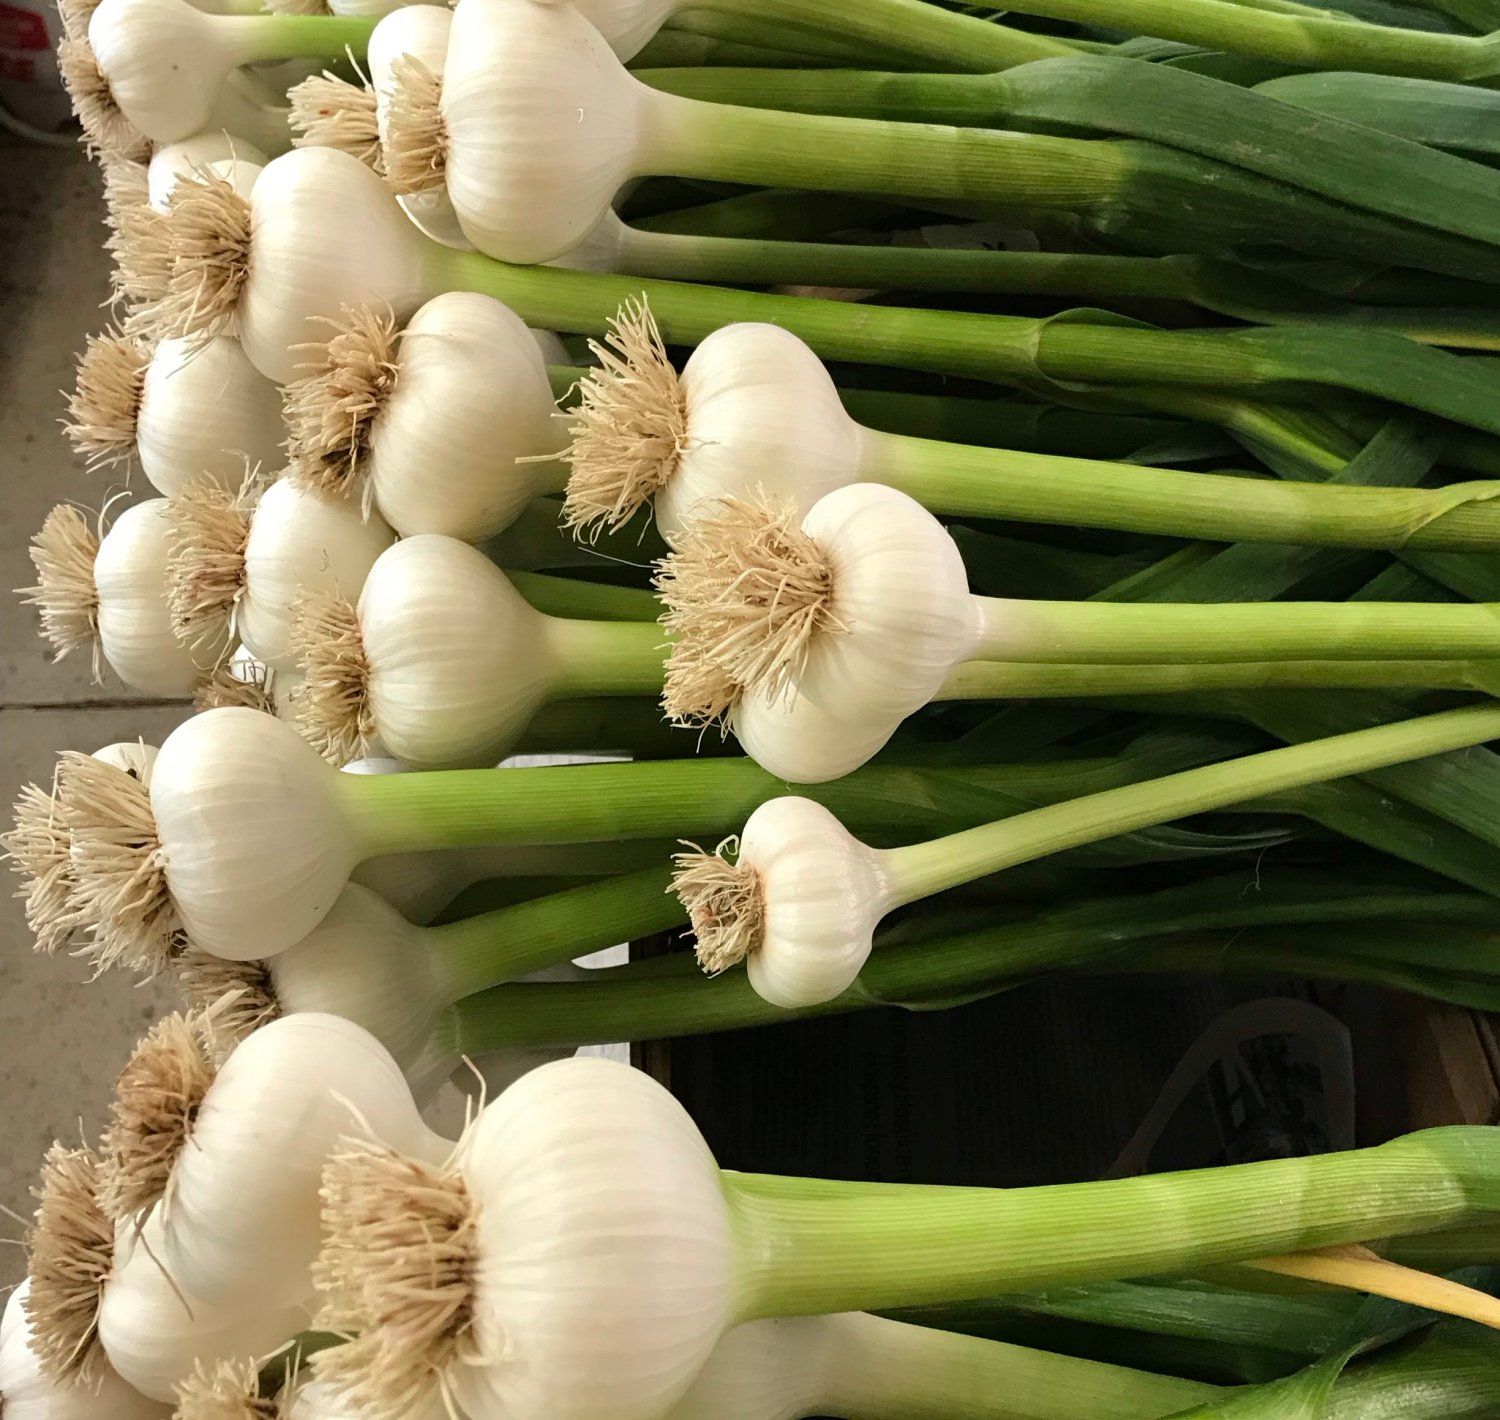 Previous Happening: Fresh Garlic Is Here!